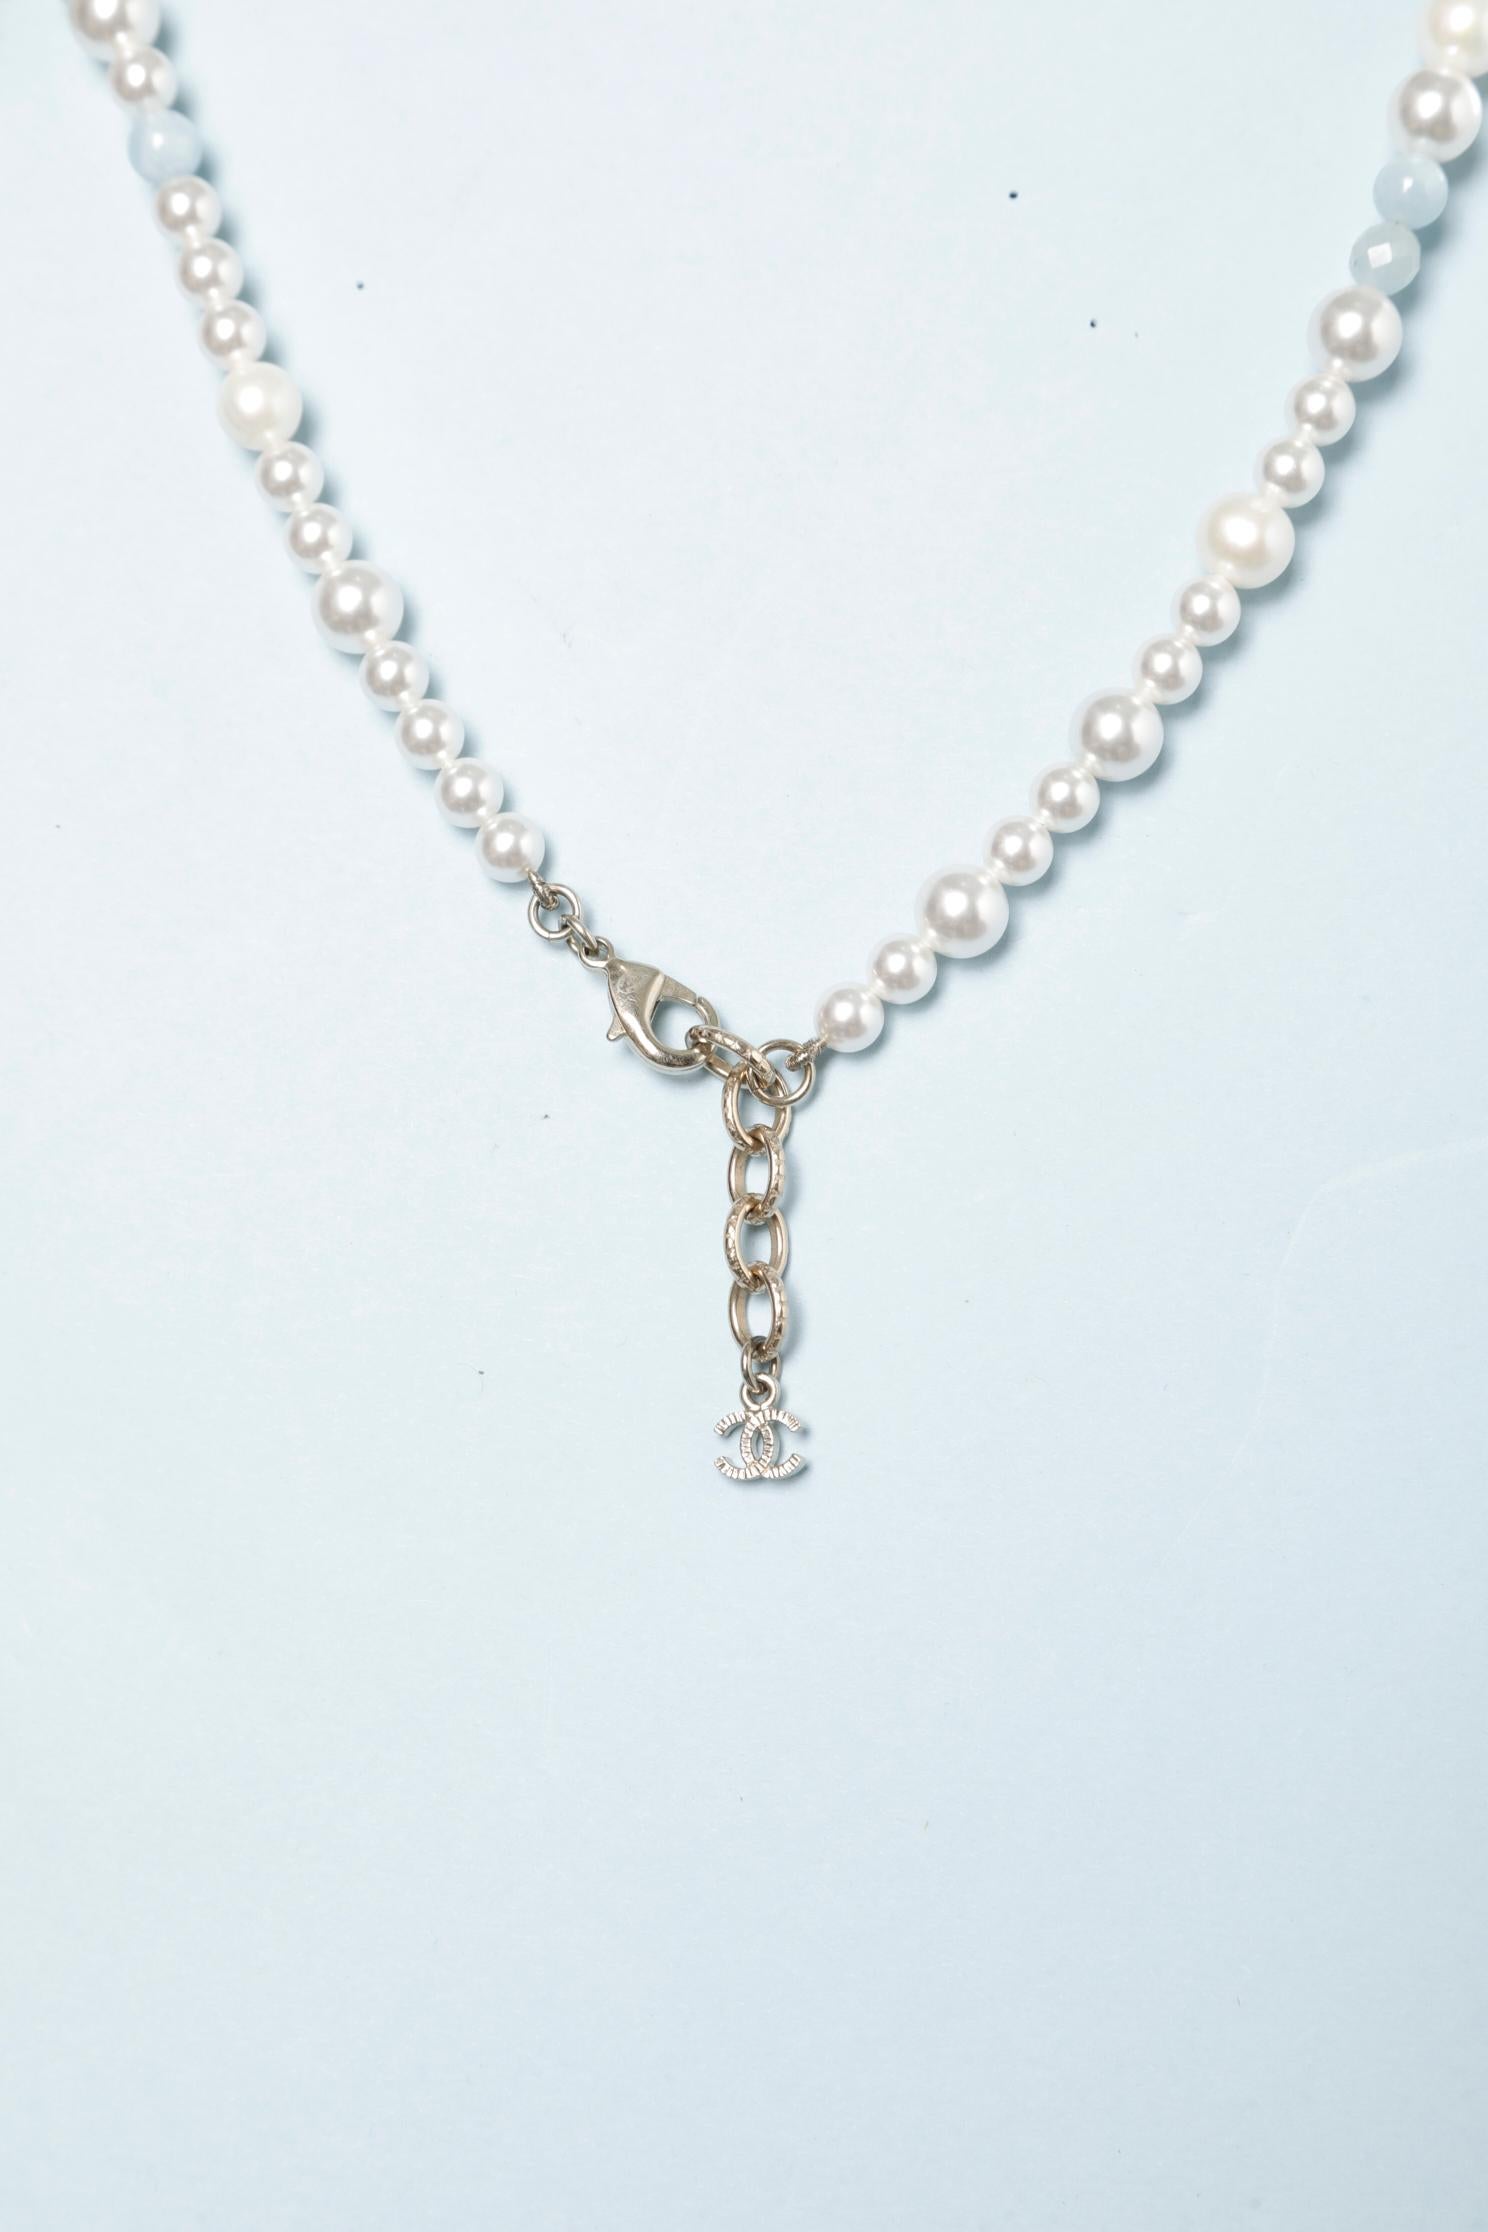 Beaded long neckless with pearls and silver beads 